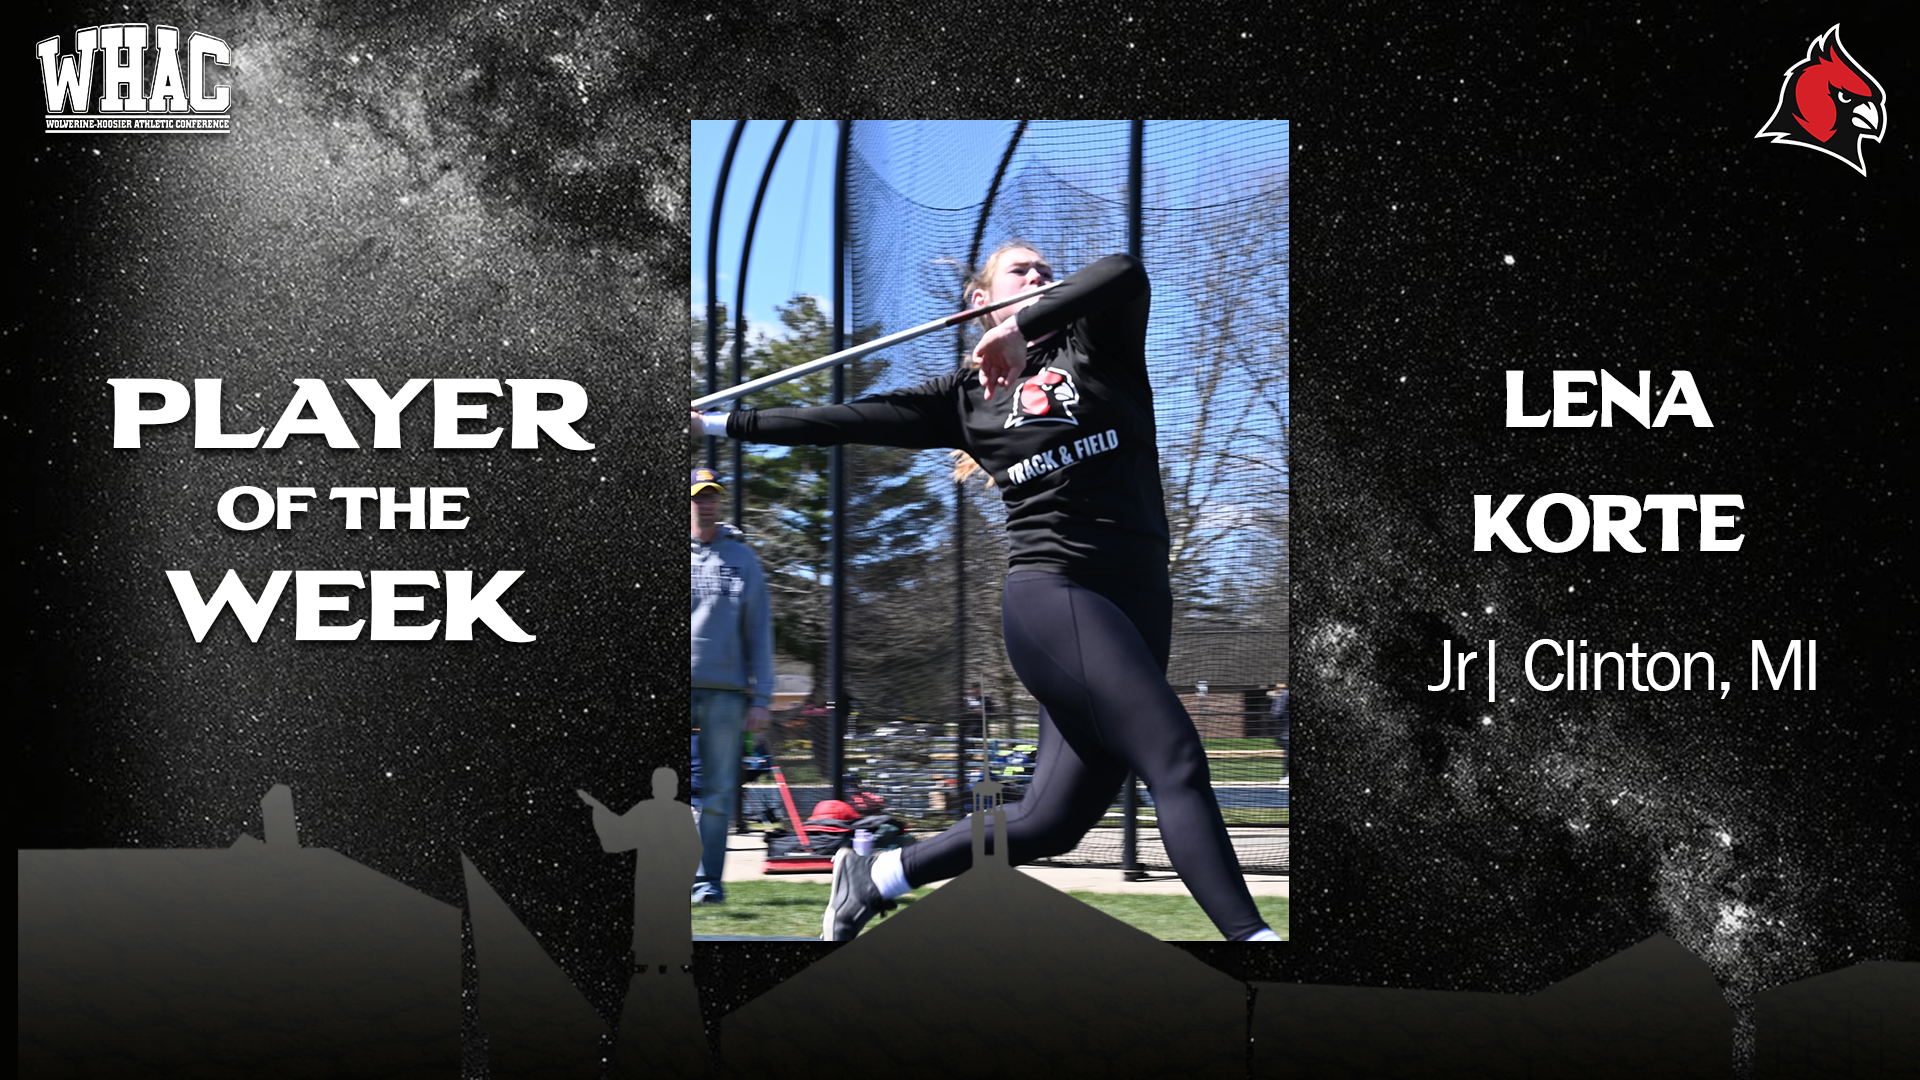 Korte takes second straight WHAC Field Athlete of the Week